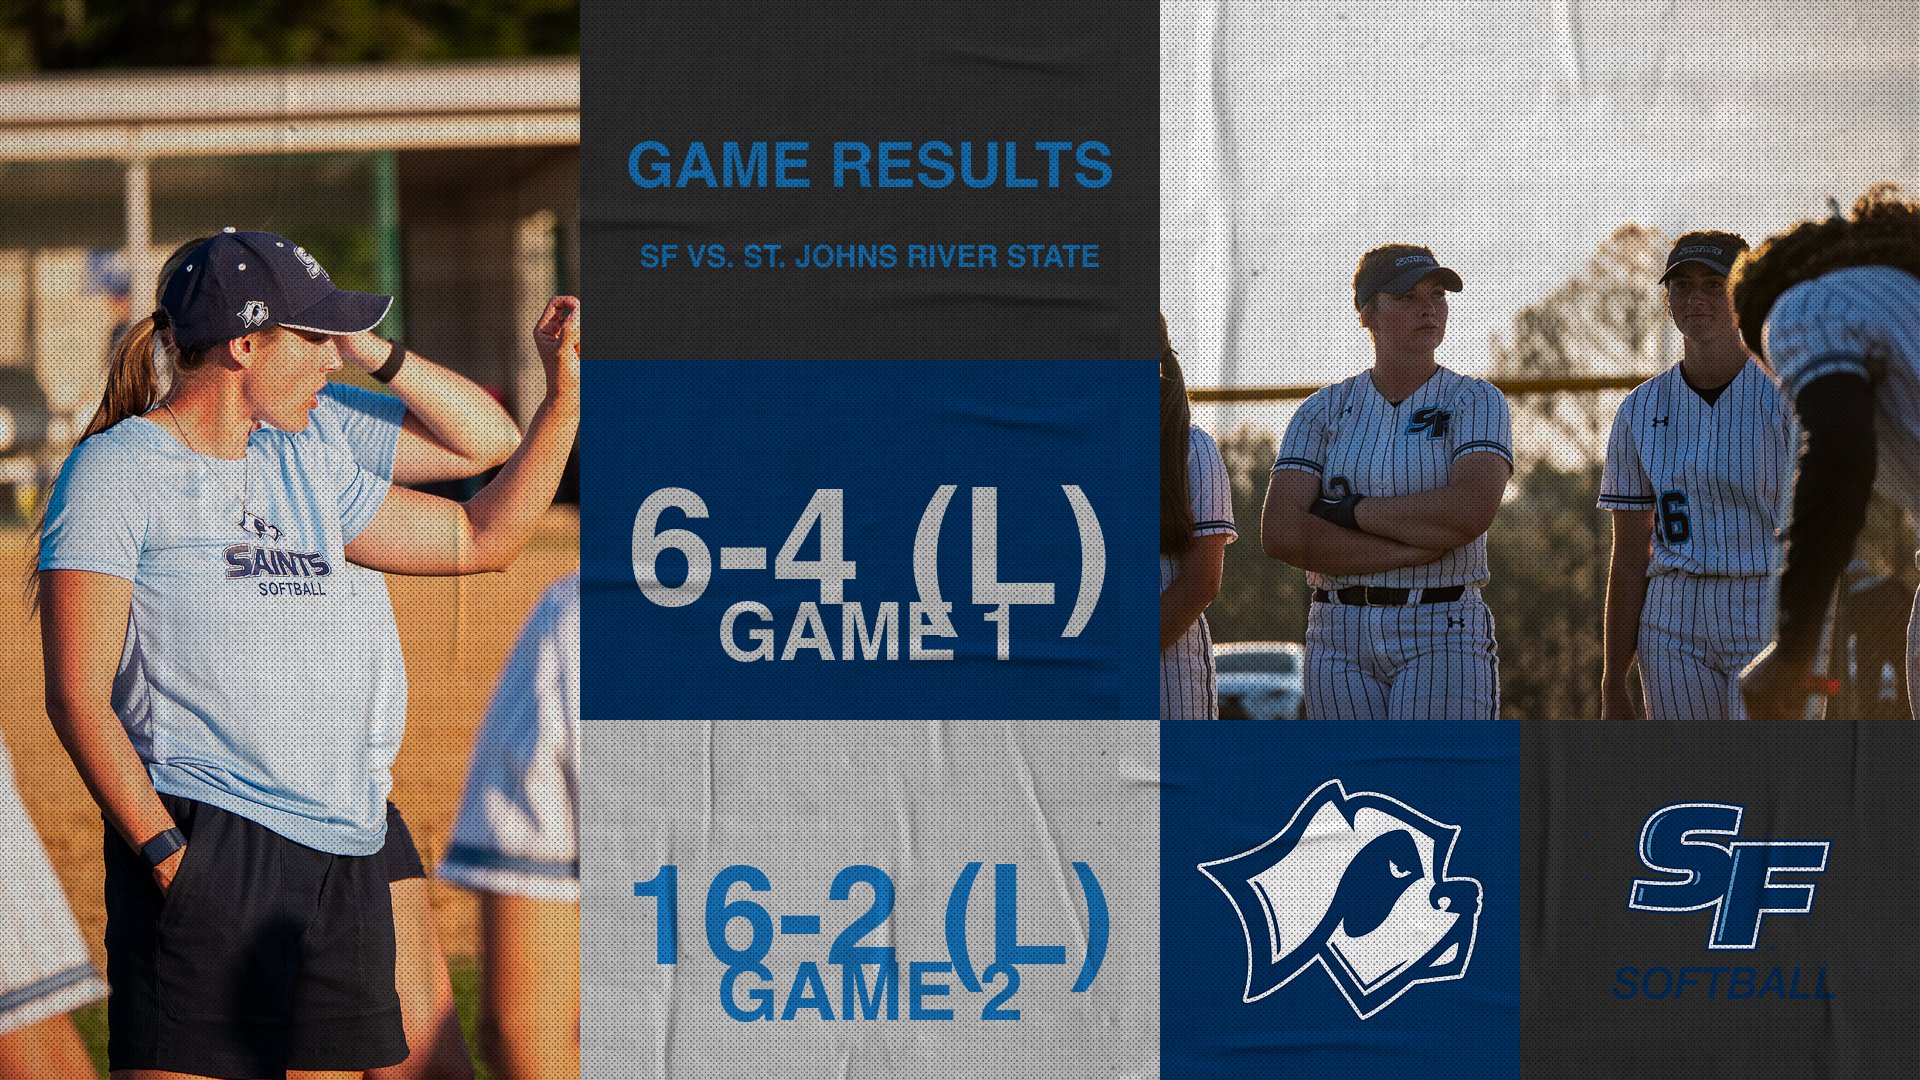 Saints Fall Short in Double Header Against St. Johns River State College